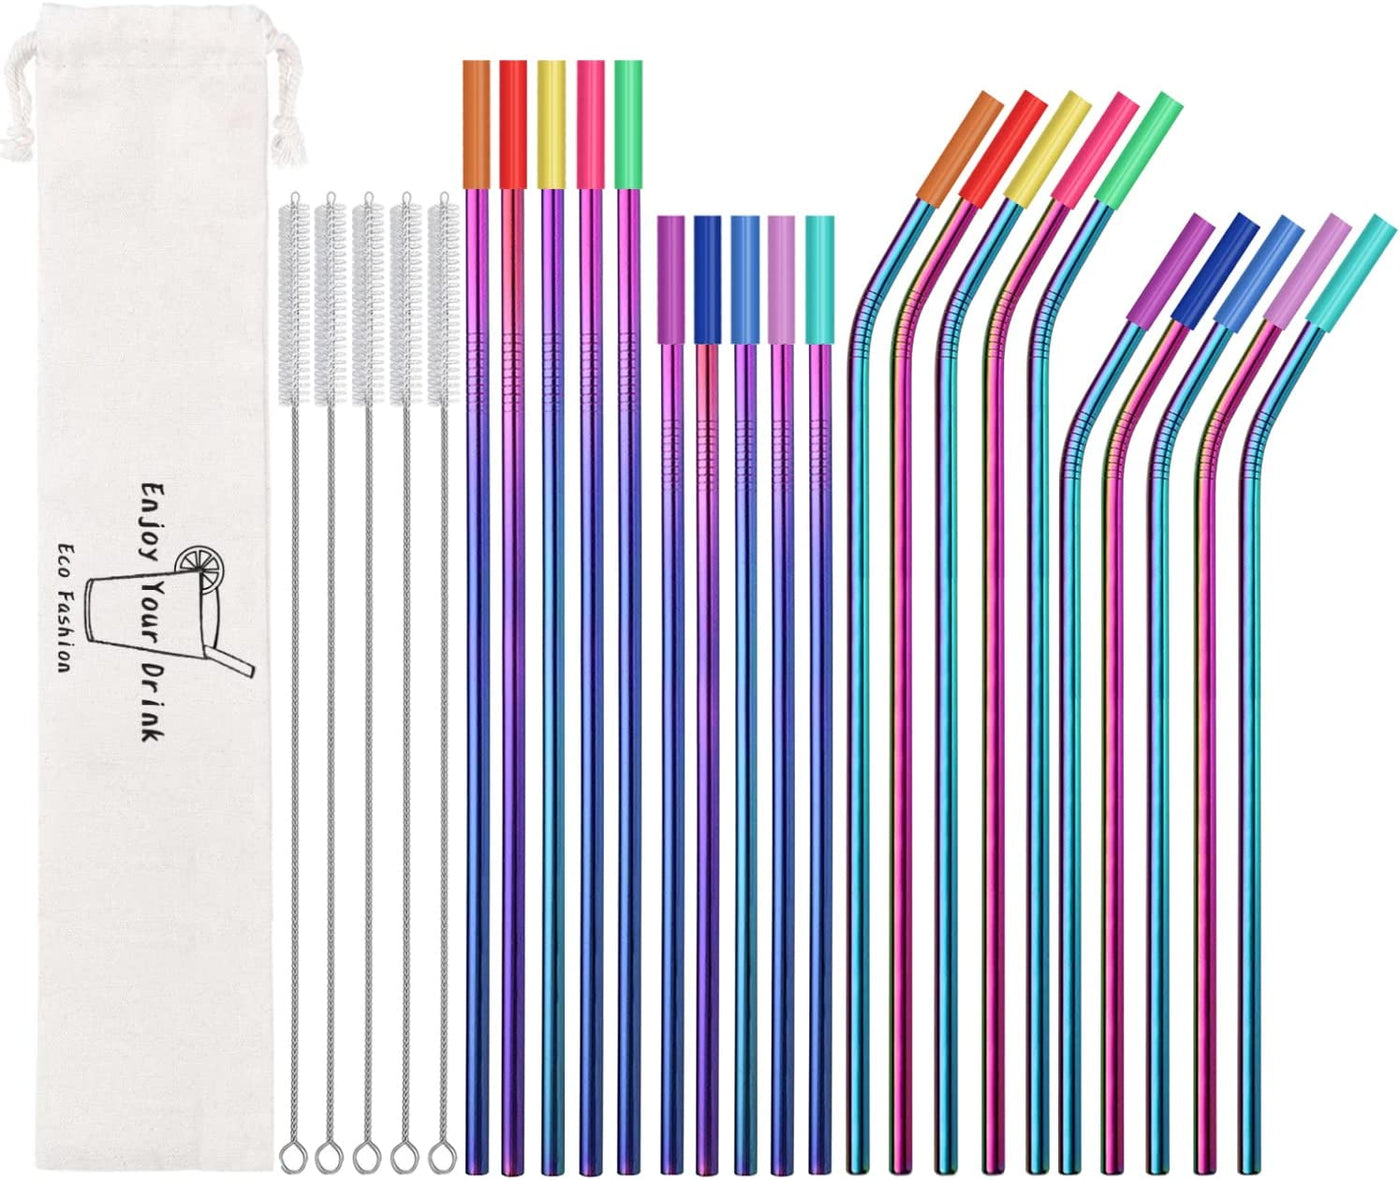 20 Pack Reusable Stainless Steel Metal Straws,10.5" & 8.5" Reusable Drinking Straws with 20 Silicone Tips 5 Straw Brushes 1 Travel Case,Eco Friendly Extra Long Metal Straw Fit for 20 24 30 oz Tumbler